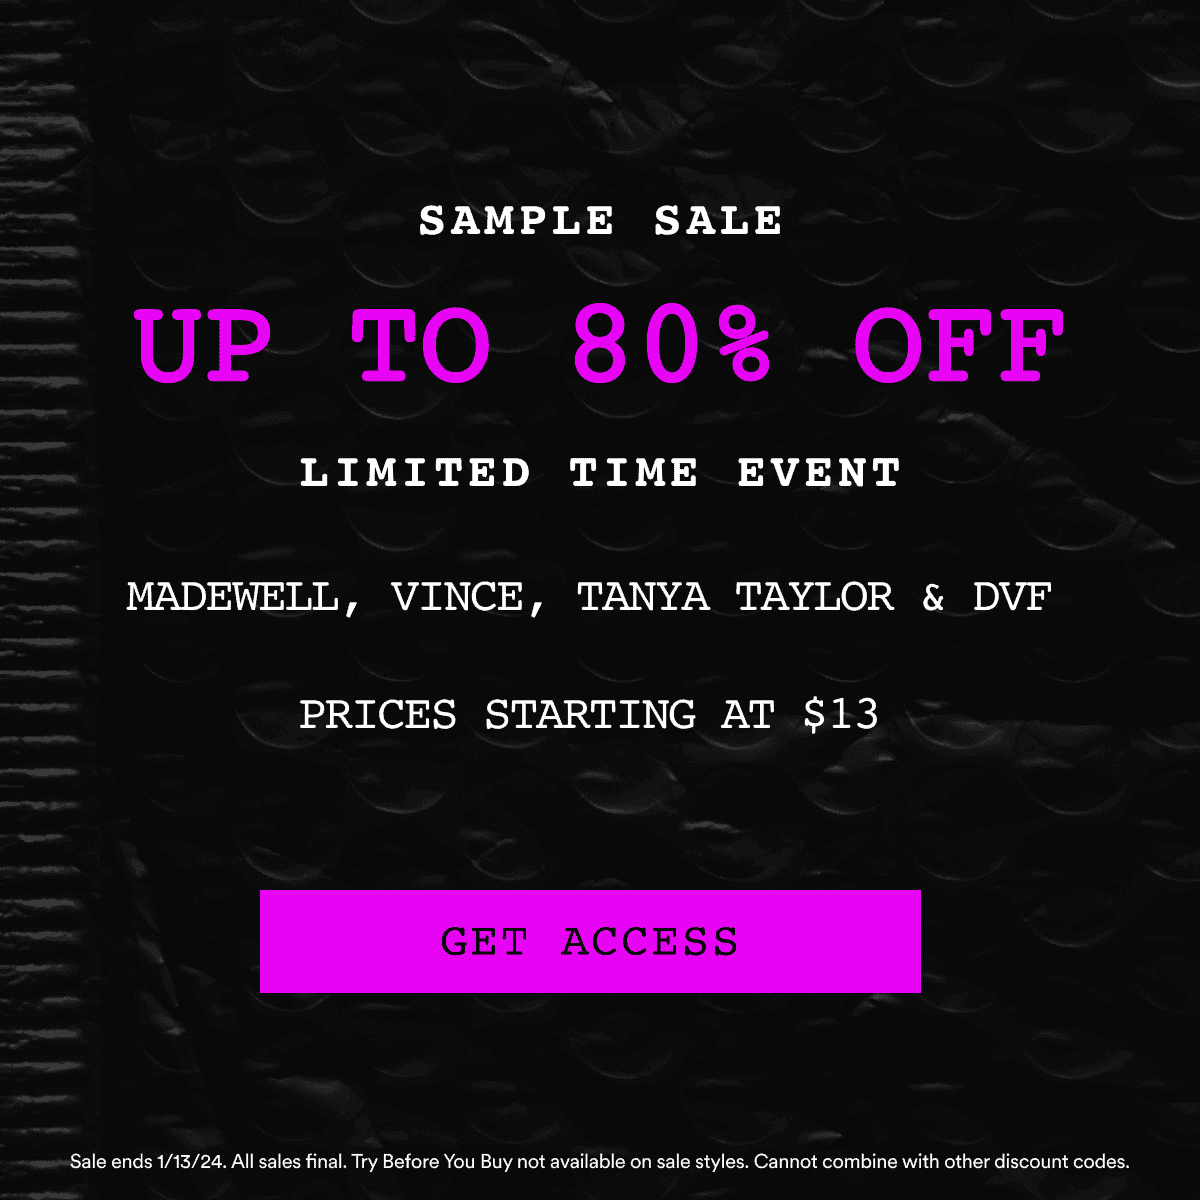 Sample Sale. UP TO 80% OFF. LIMITED TIME EVENT. Madewell, Vince, Tanya Taylor & DVF. Prices starting at \\$13. Get Access